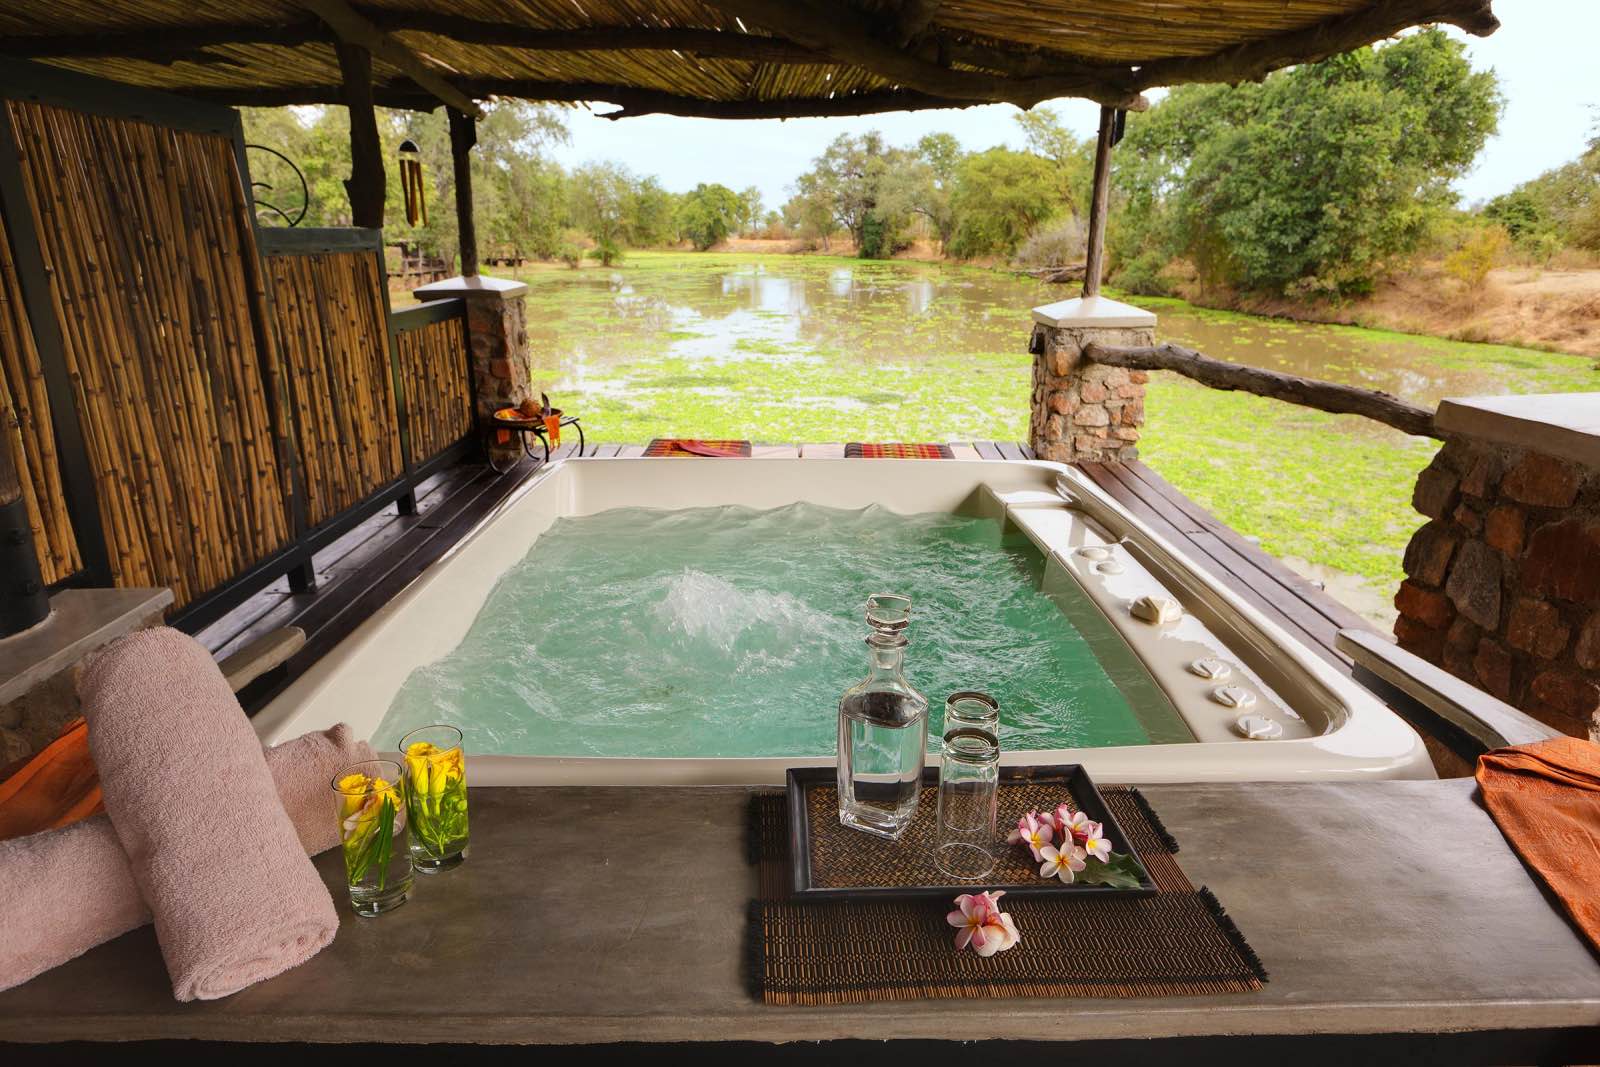 A jacuzzi with a view of the hippo-filled swamp